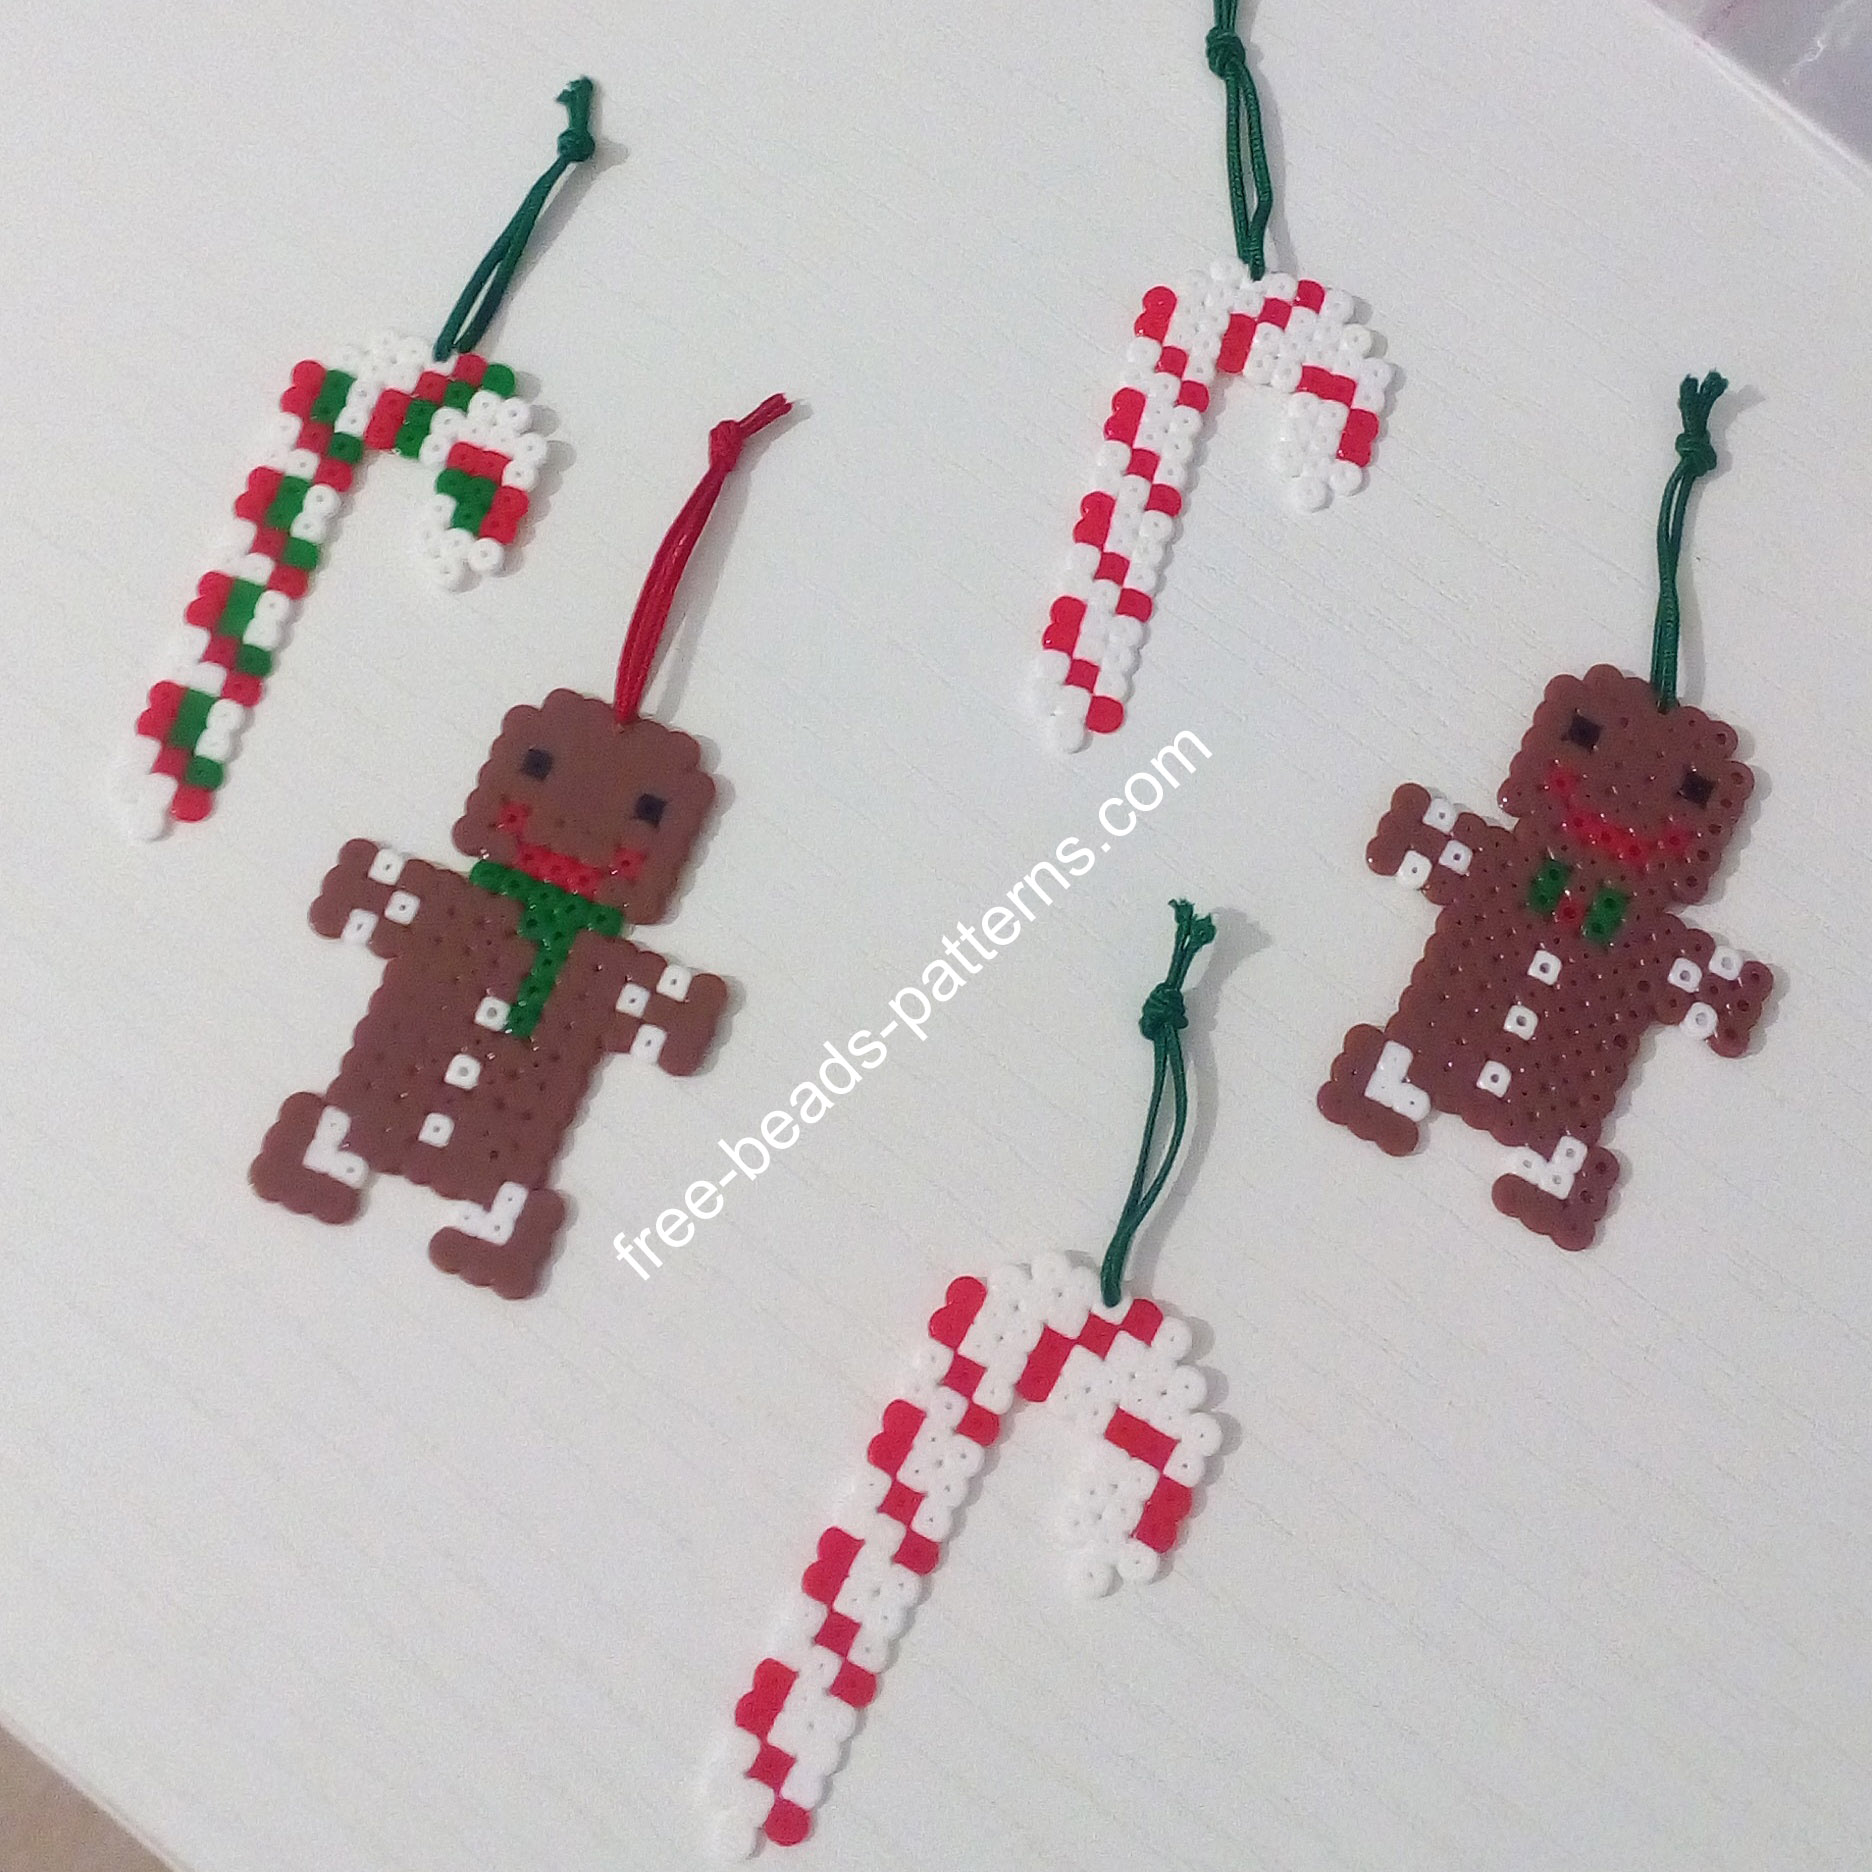 Gingerbread man and candy canes hama beads perler fuse beads final photo